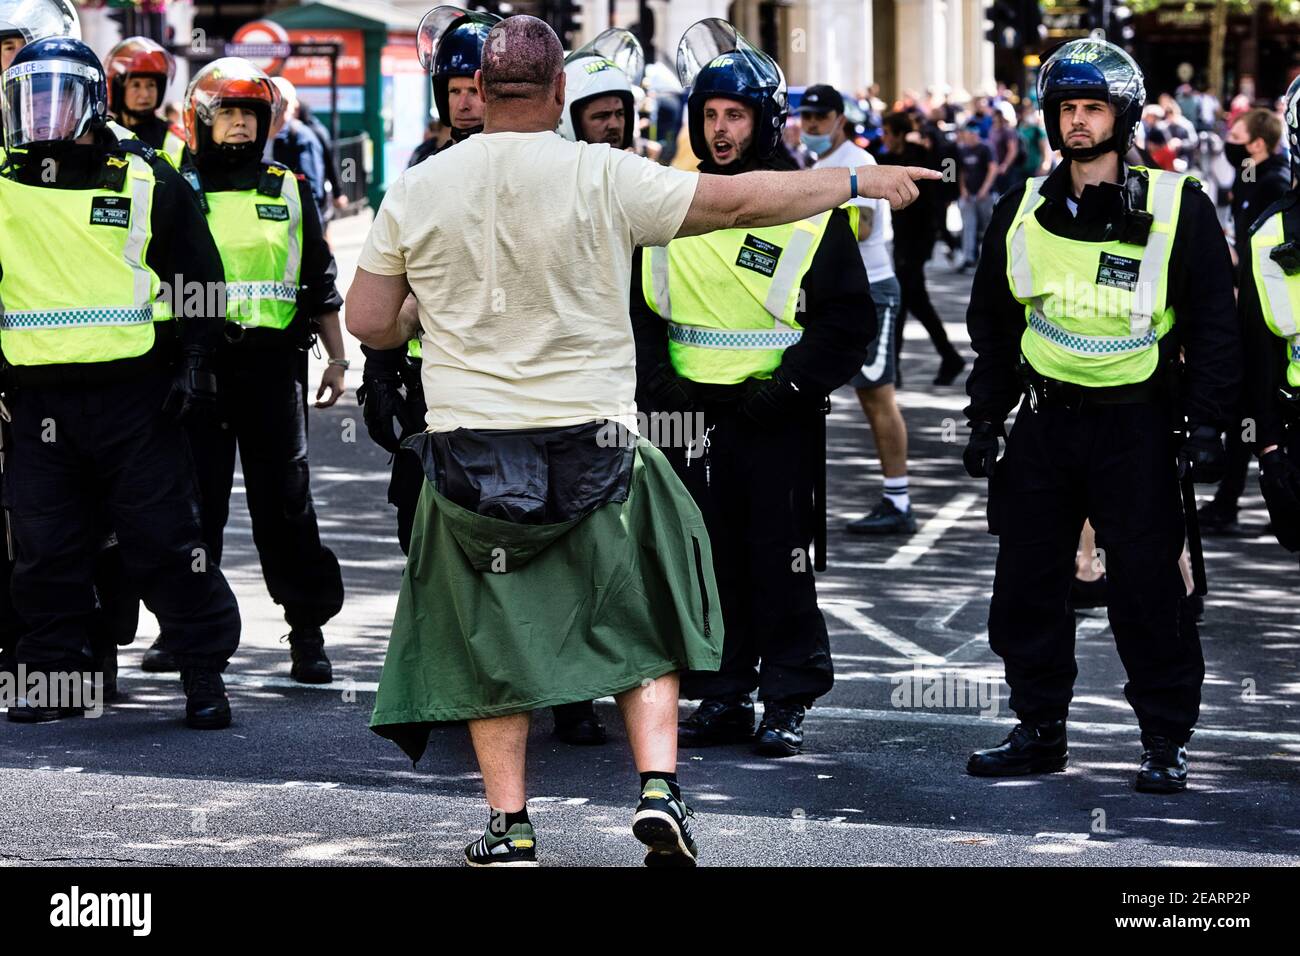 London 13 June 2020 Demonstrators from Far right groups clashing with BLM Demostrators and police in Trafalgar Square Stock Photo